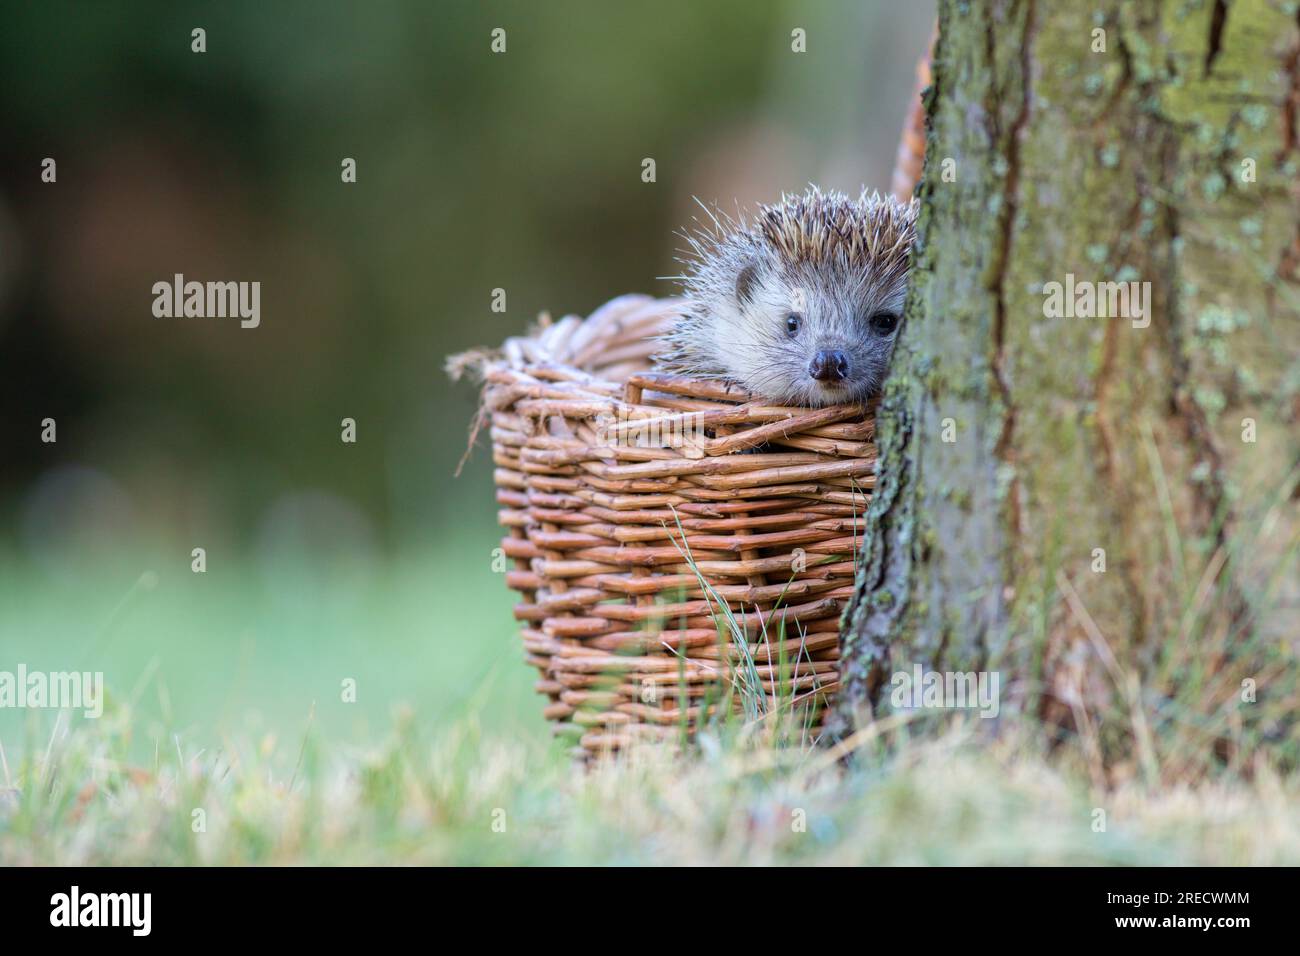 Northern white-breasted hedgehog (Erinaceus roumanicus) looking out of a wicker basket next to a tree Stock Photo